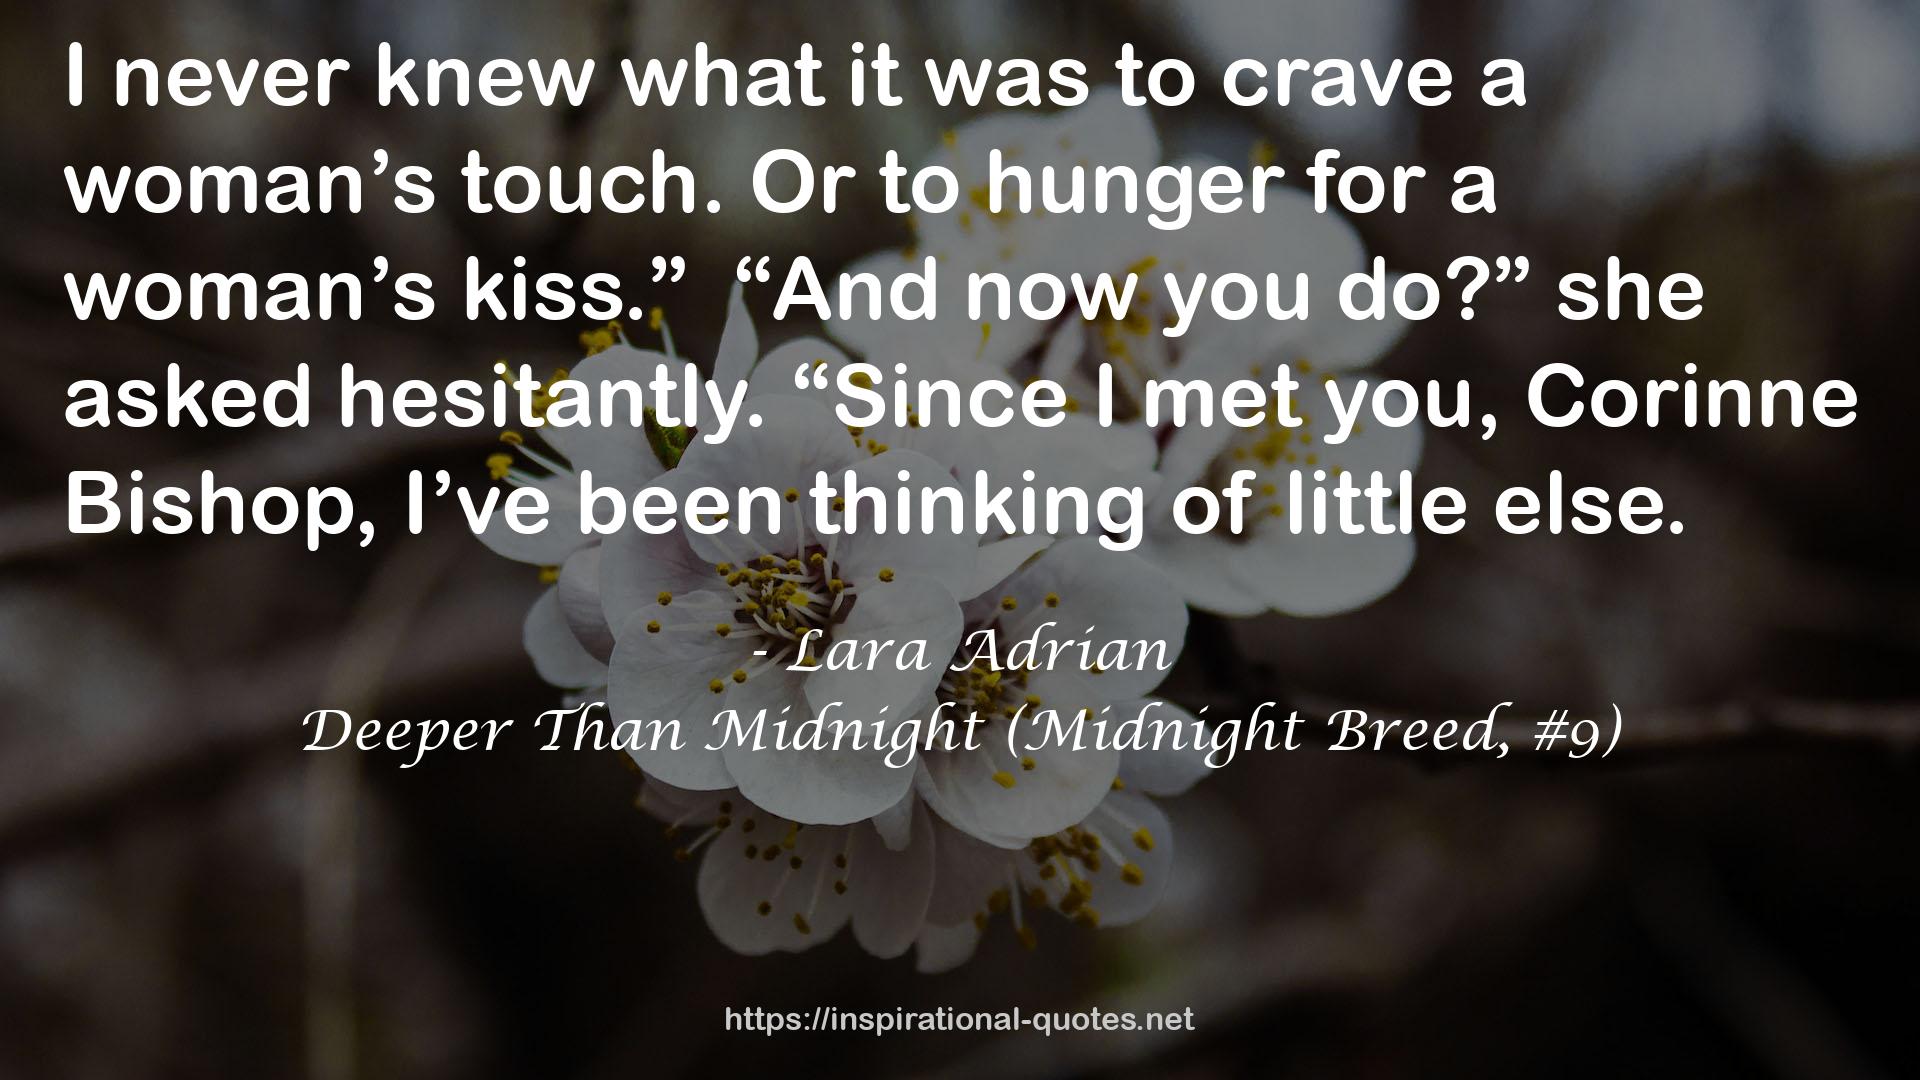 Deeper Than Midnight (Midnight Breed, #9) QUOTES